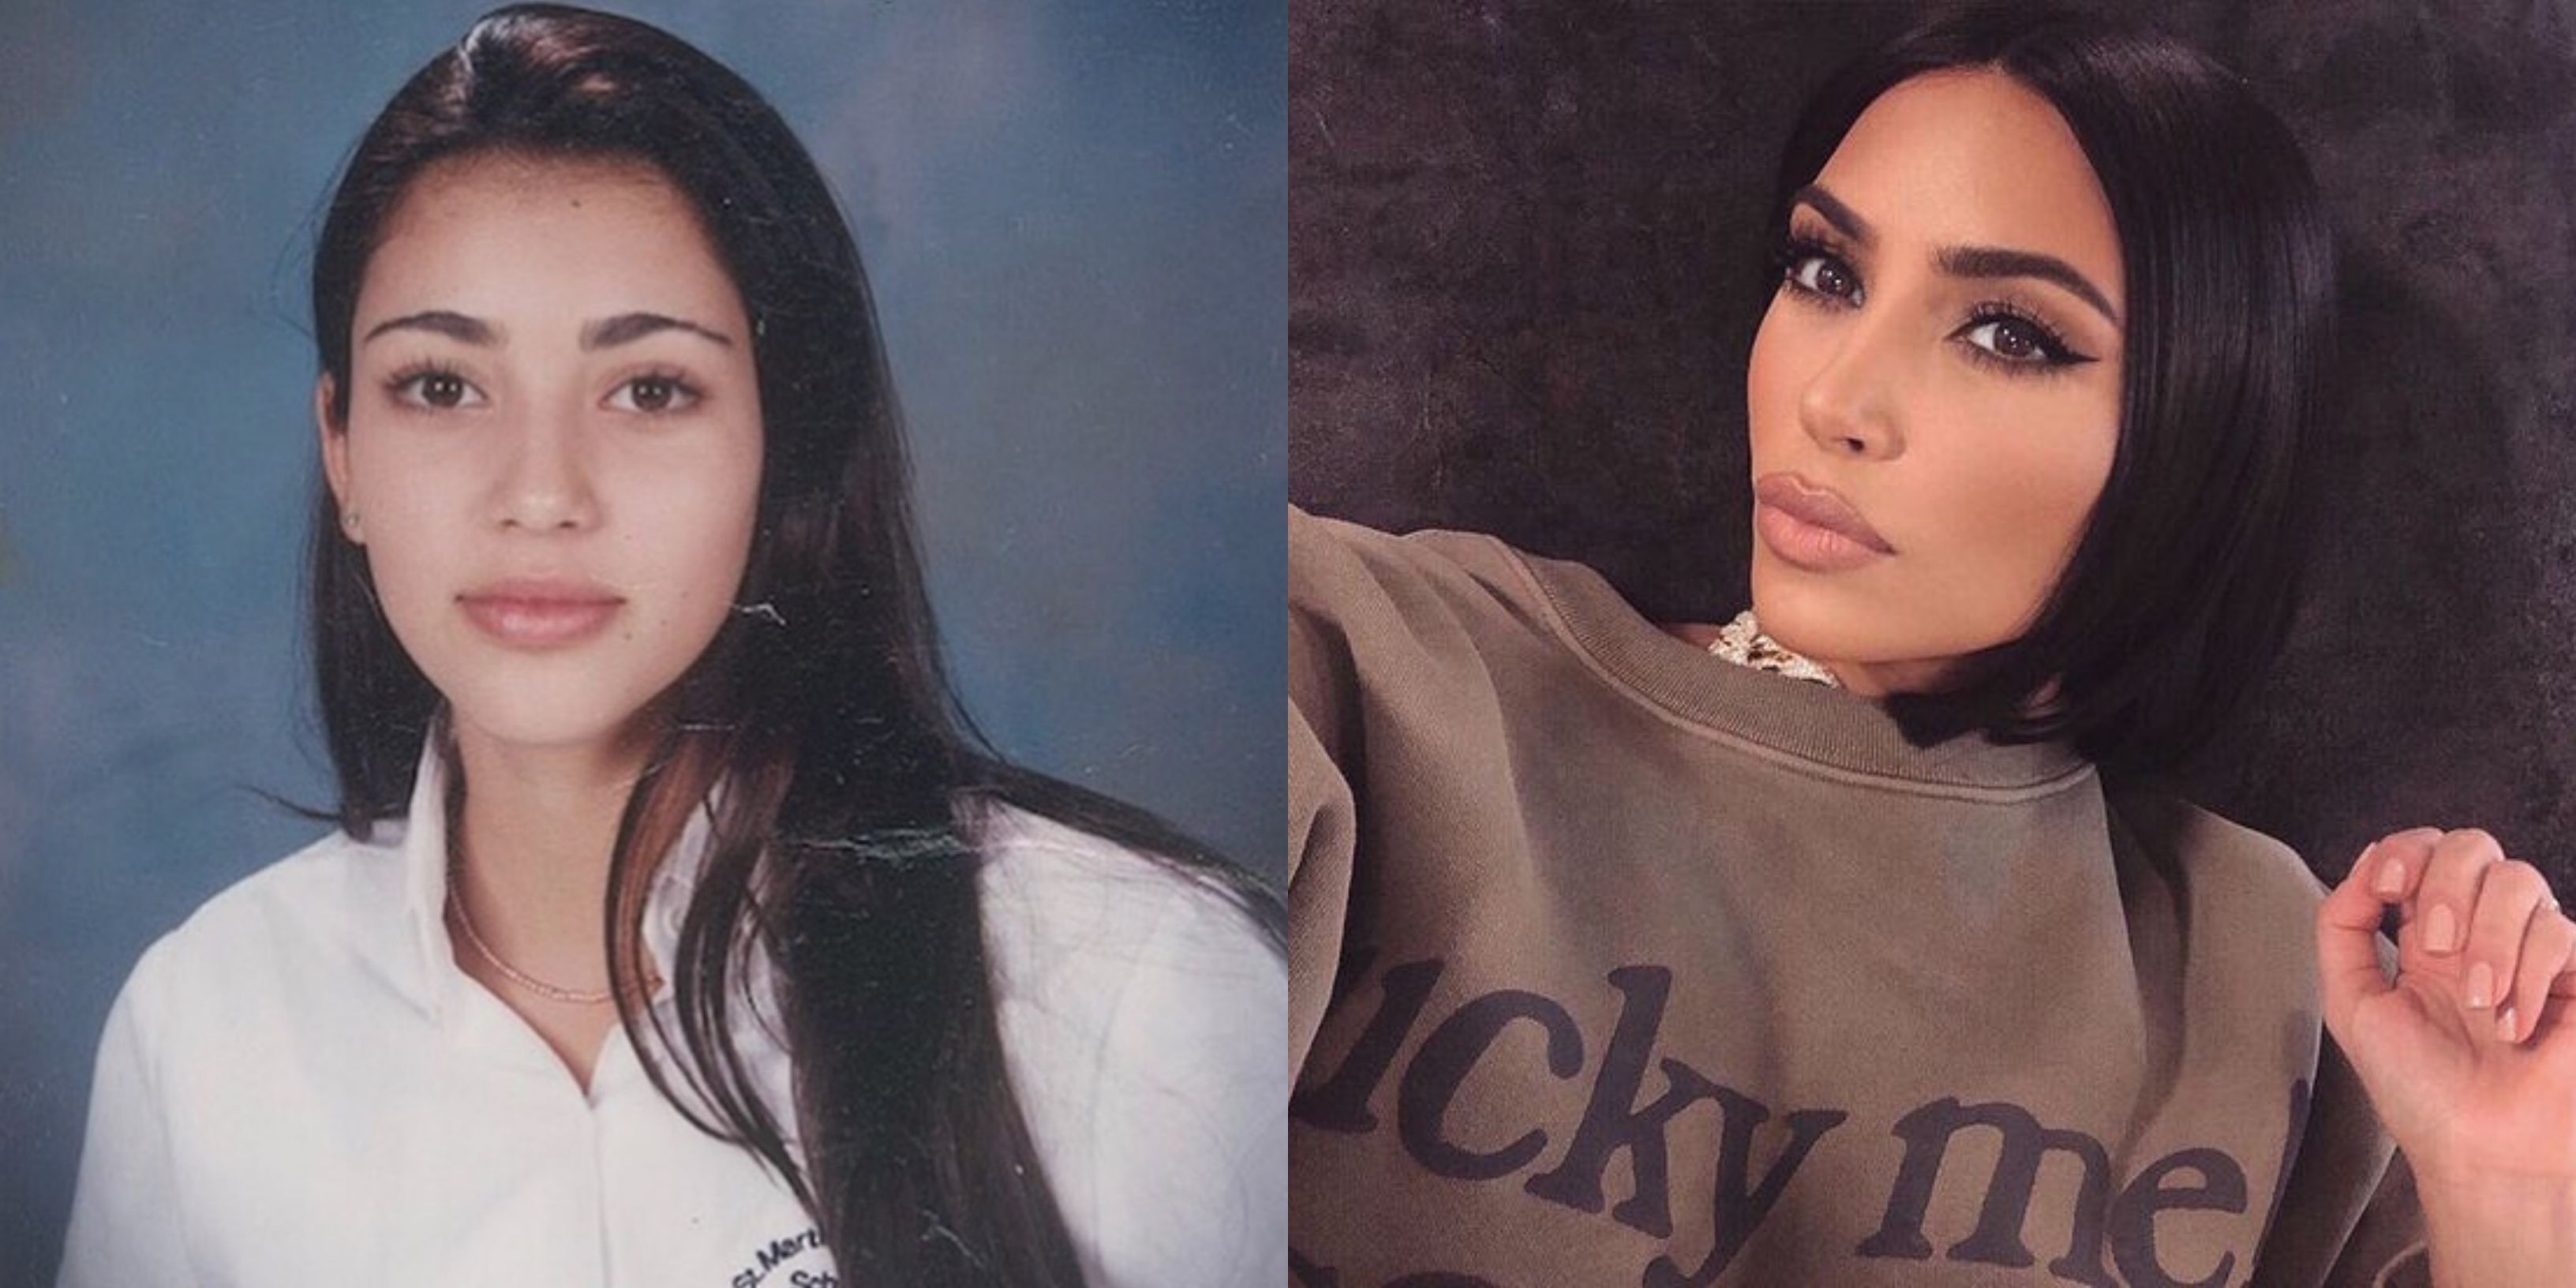 10 Celebrity Yearbook Photos That Are Absolutely Unrecognizable